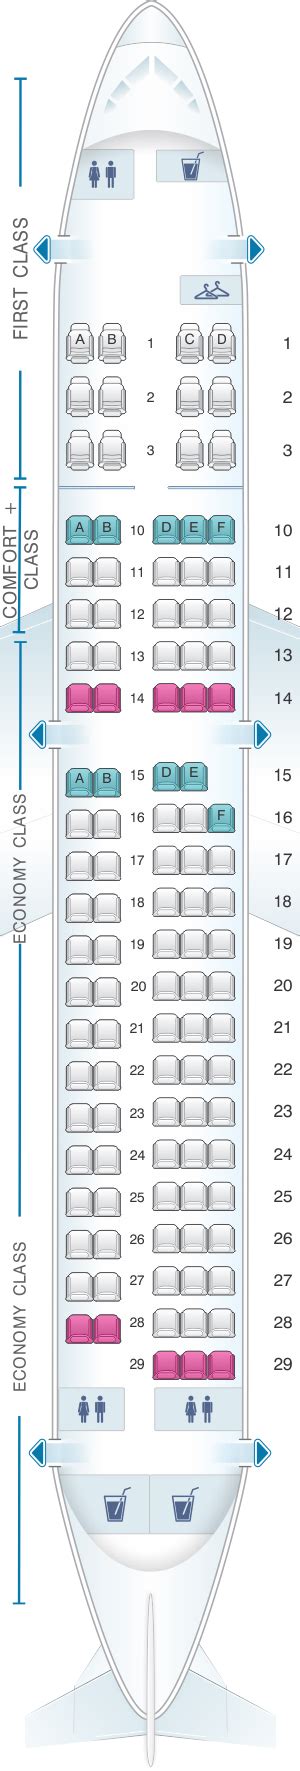 Airbus A220 100 Seating Chart Image To U